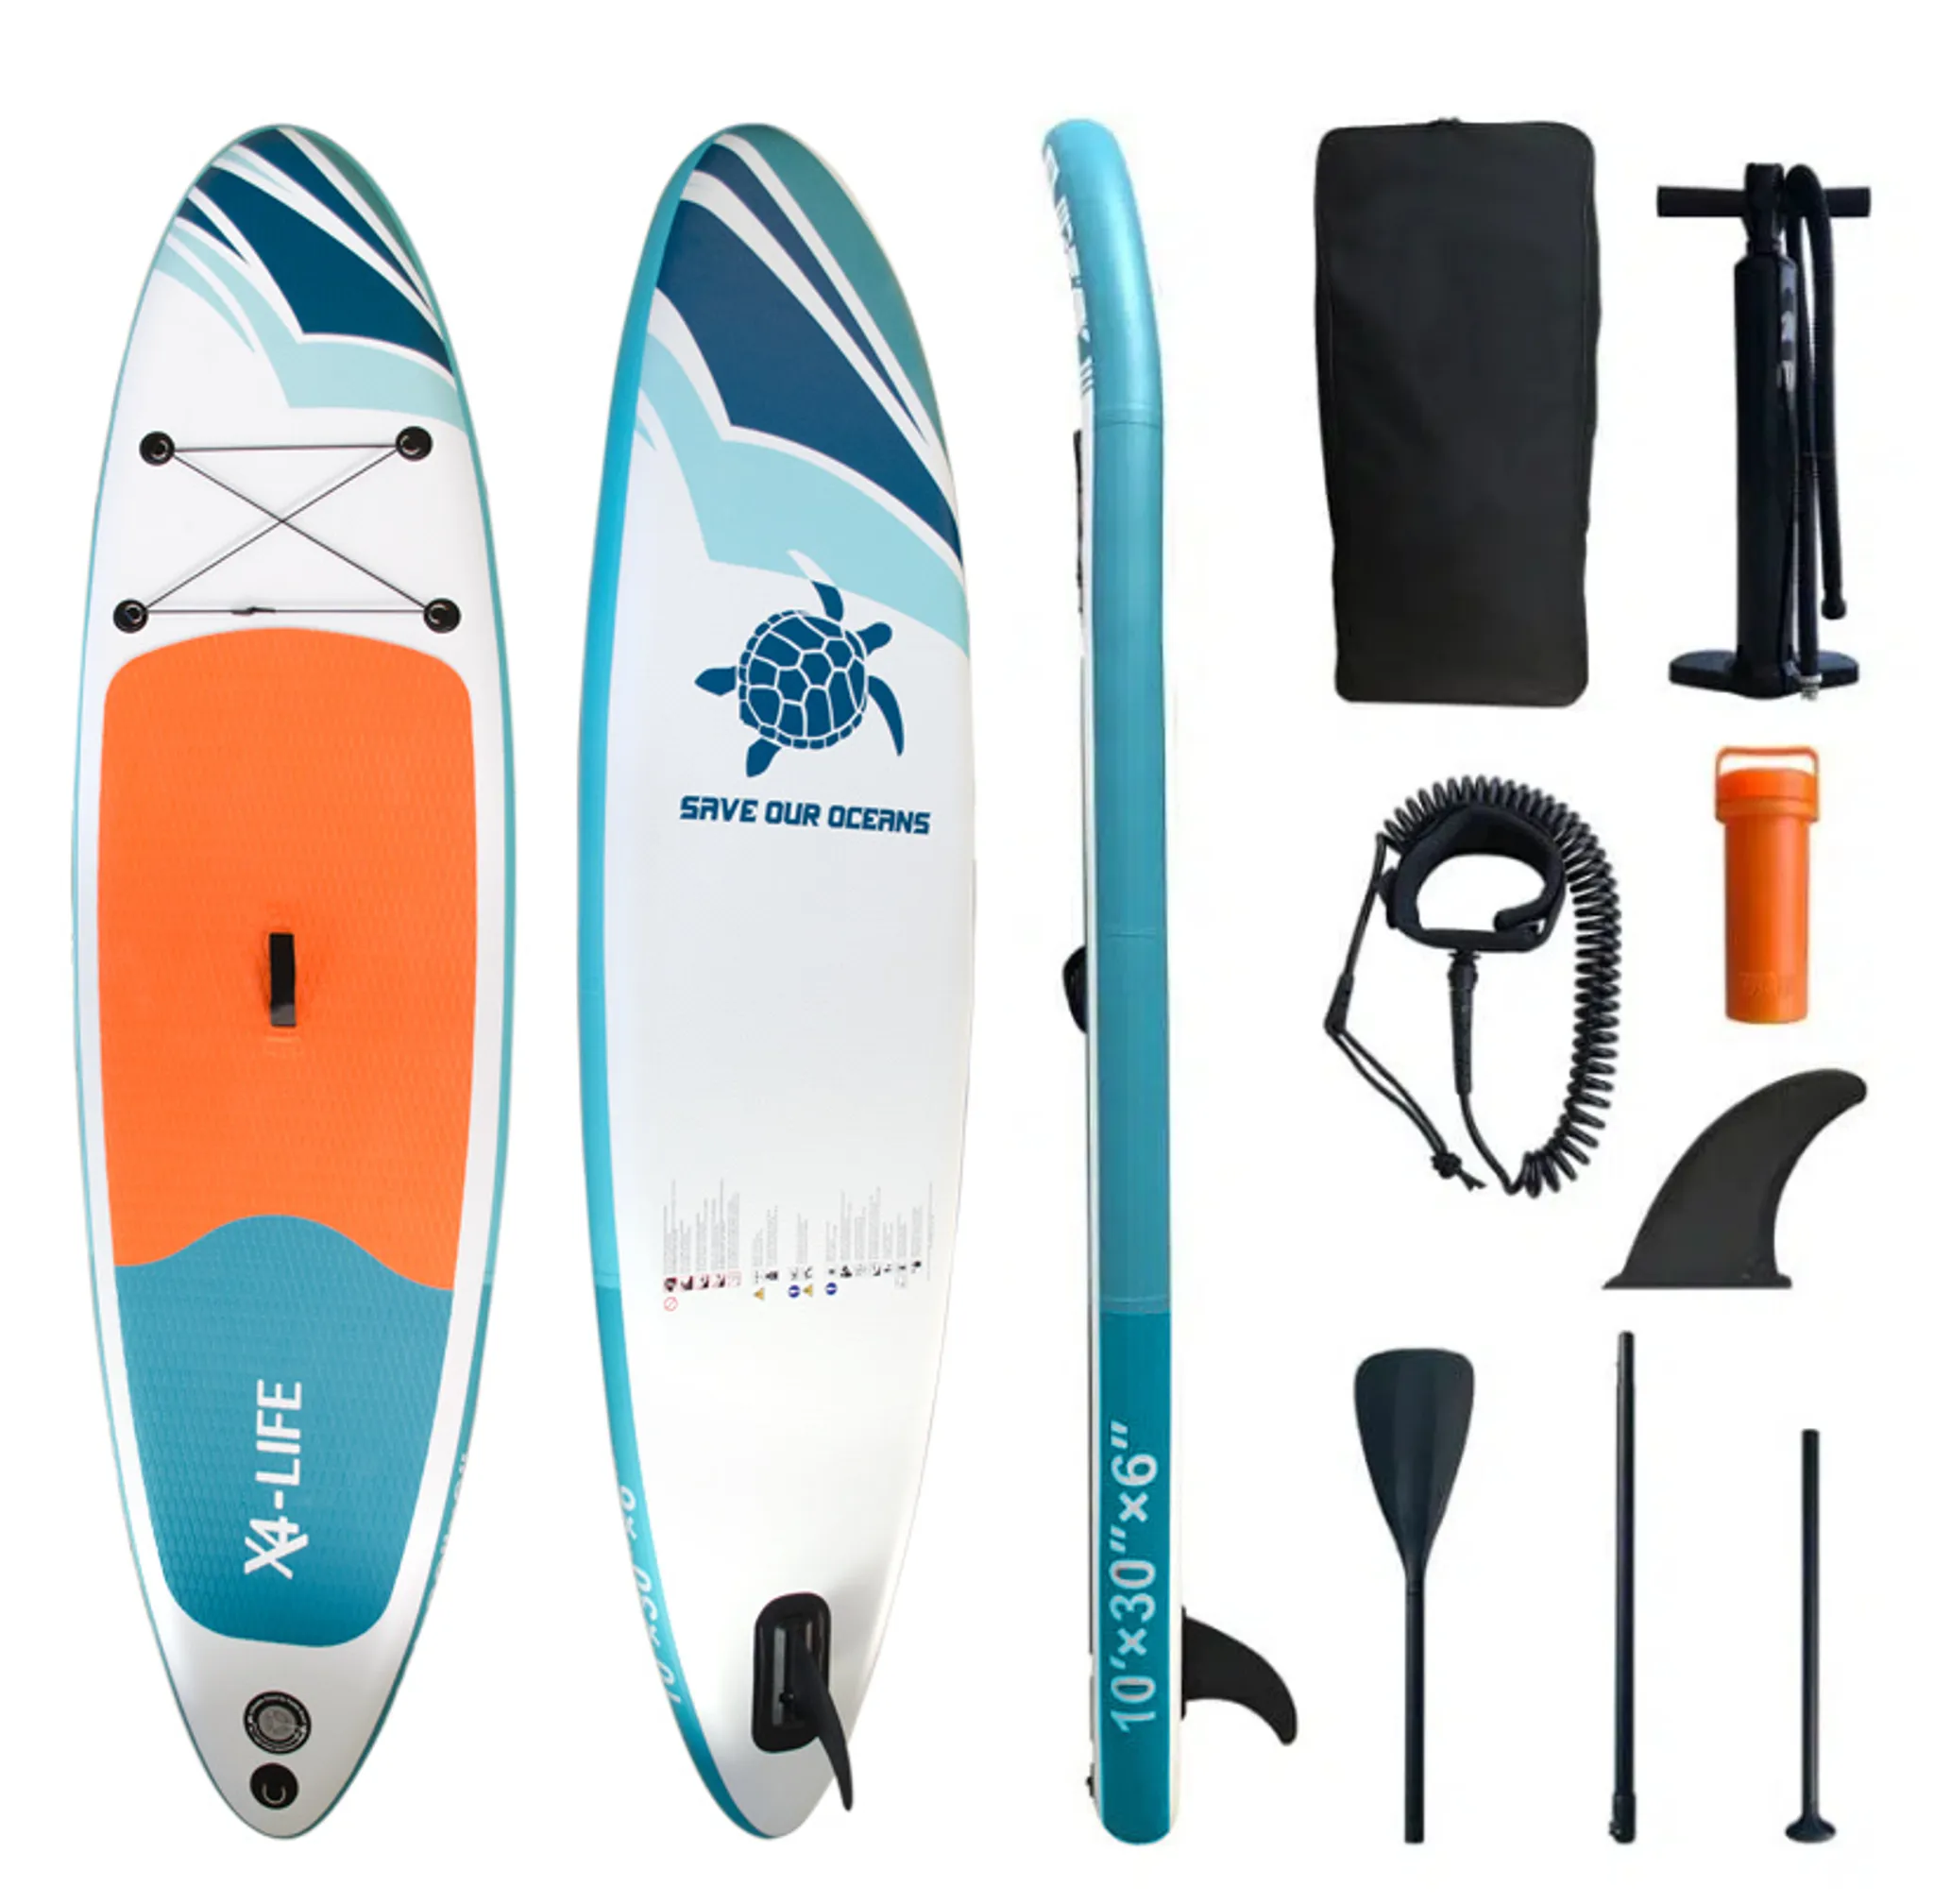 Stand X4-LIFE Paddle SUP - Set Board Up